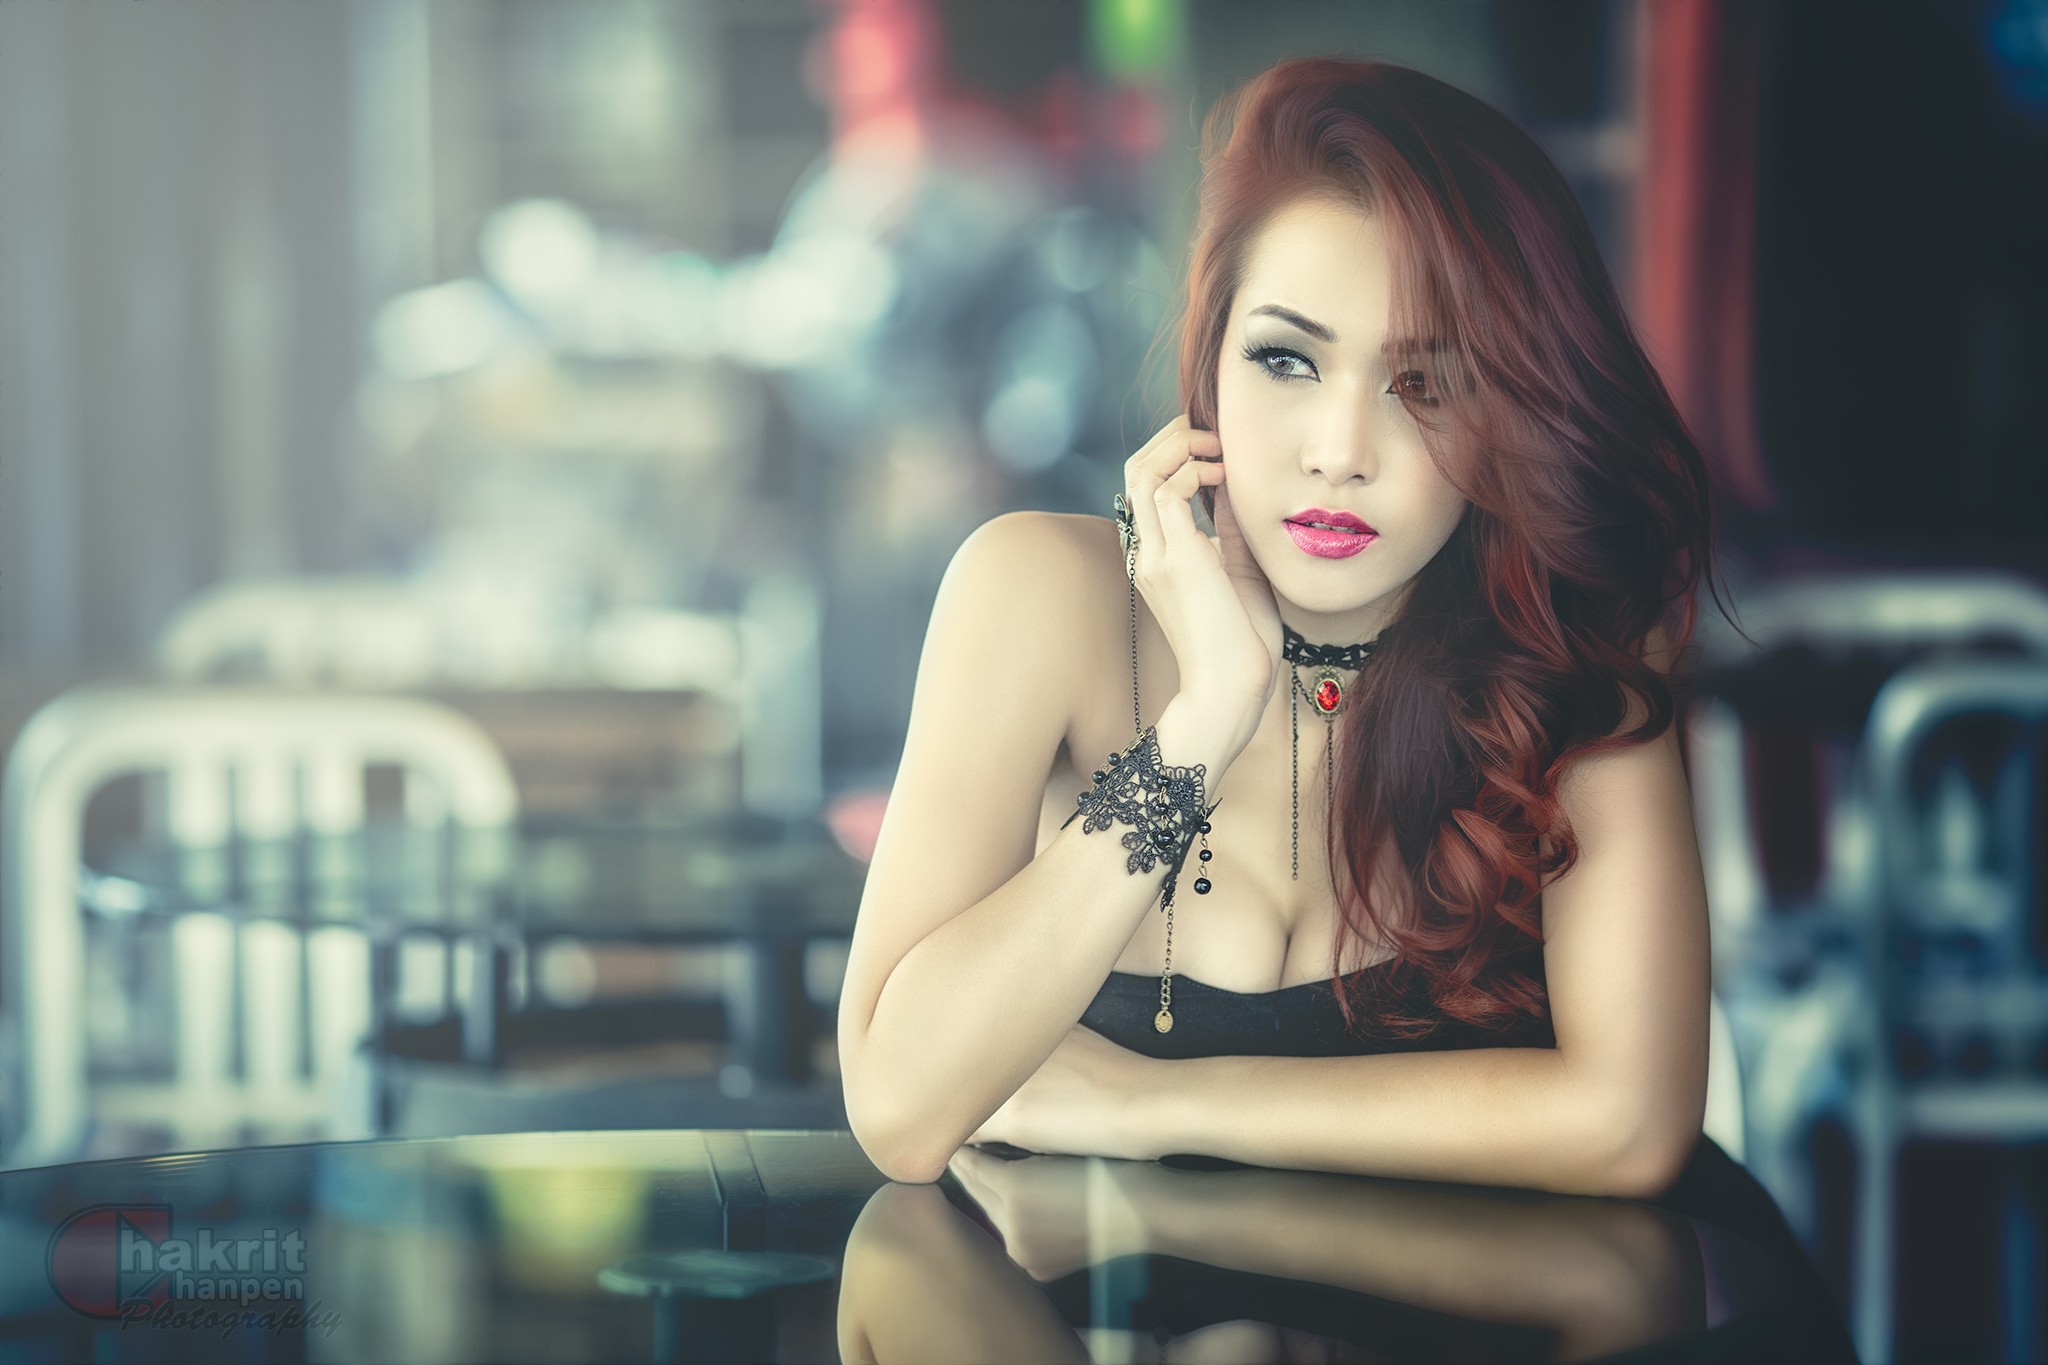 People 2048x1365 women model redhead Asian cleavage makeup necklace dyed hair women indoors indoors pink lipstick eyeliner looking away pale Chakrit Chanpen